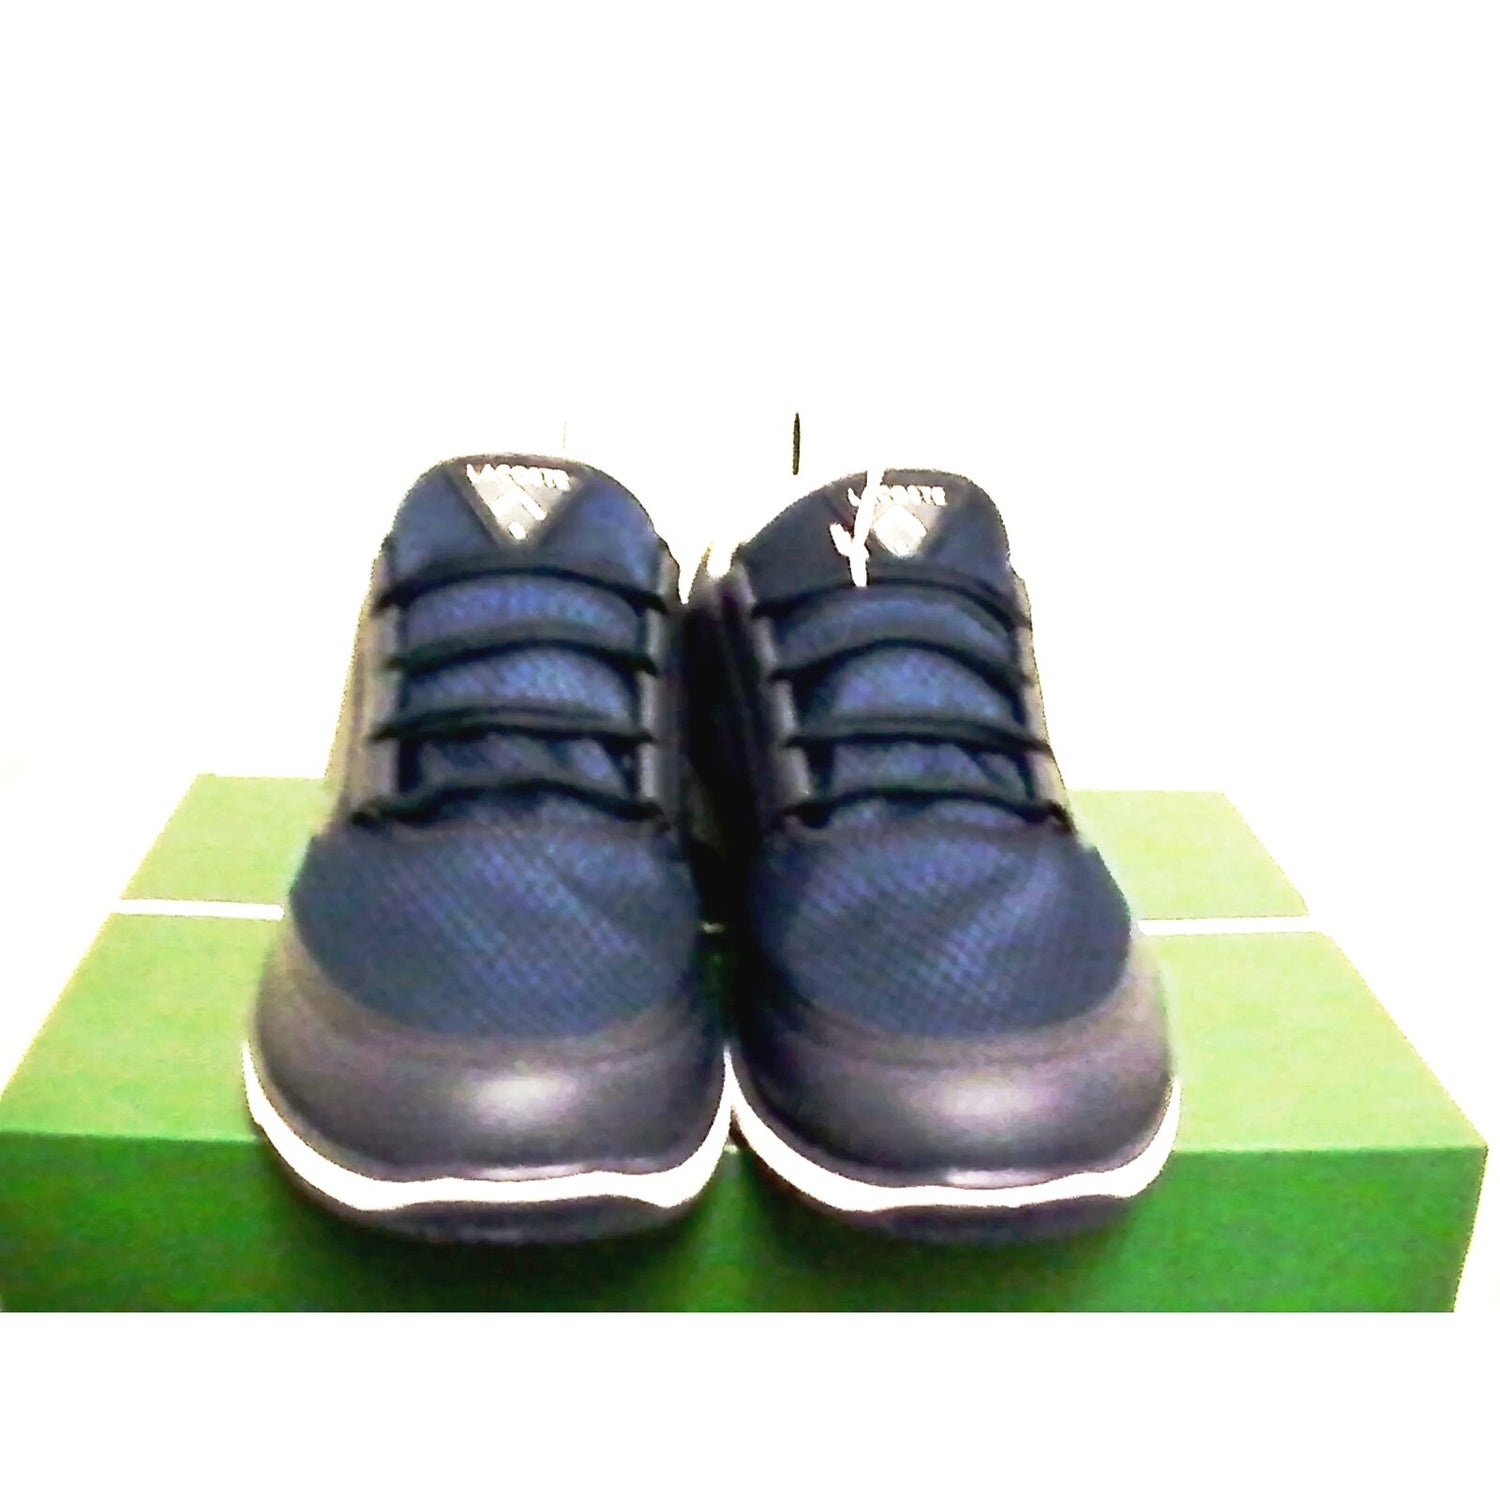 Lacoste shoes L.IGHT LT12 spm txt/syn dark blue training size 8 new with box